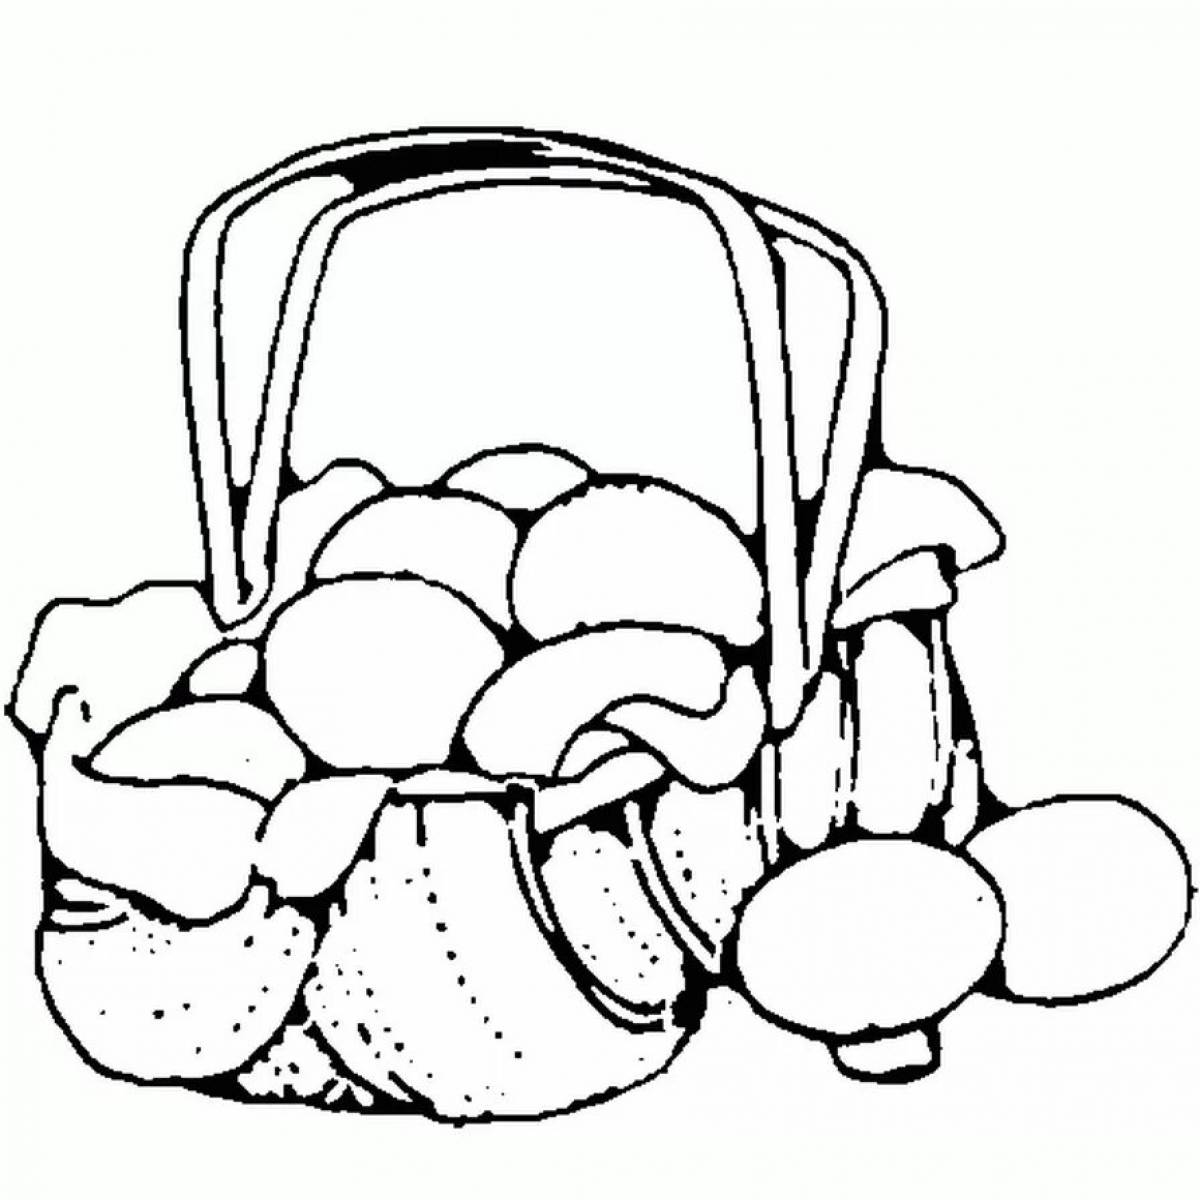 Coloring page glamor basket with mushrooms